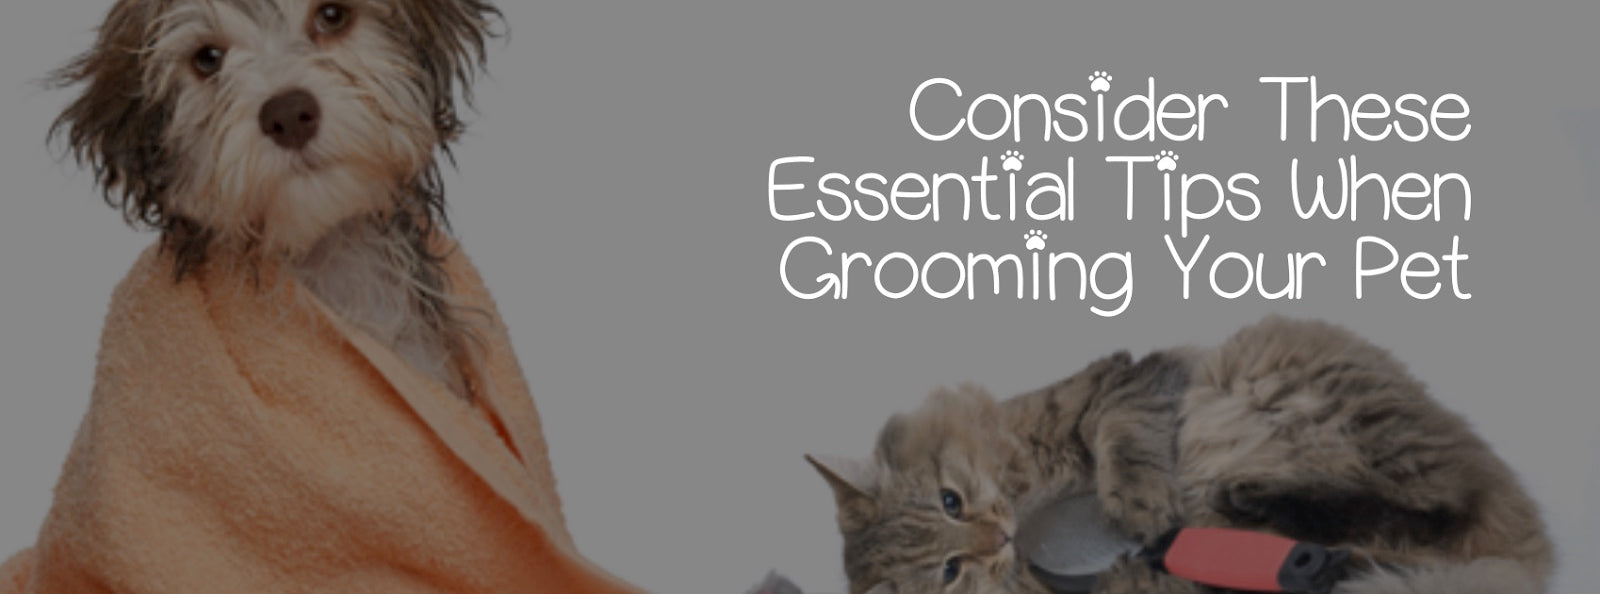 CONSIDER THESE ESSENTIAL TIPS WHEN GROOMING YOUR PET